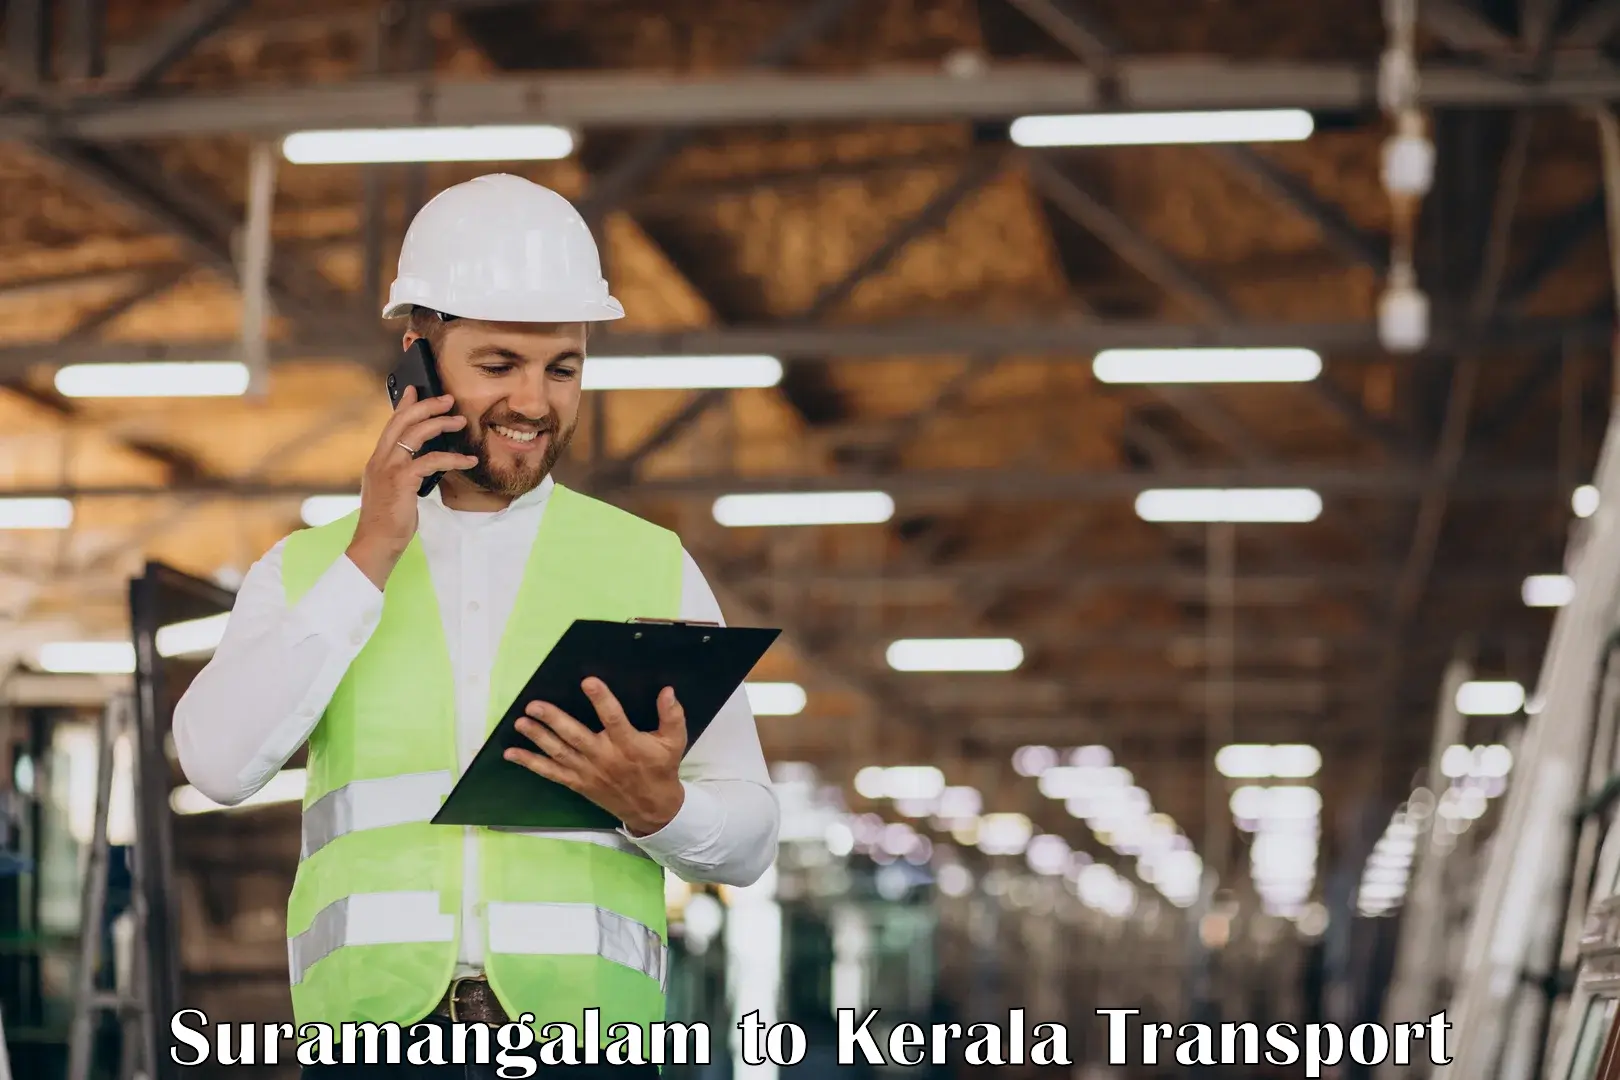 Truck transport companies in India Suramangalam to Payyanur